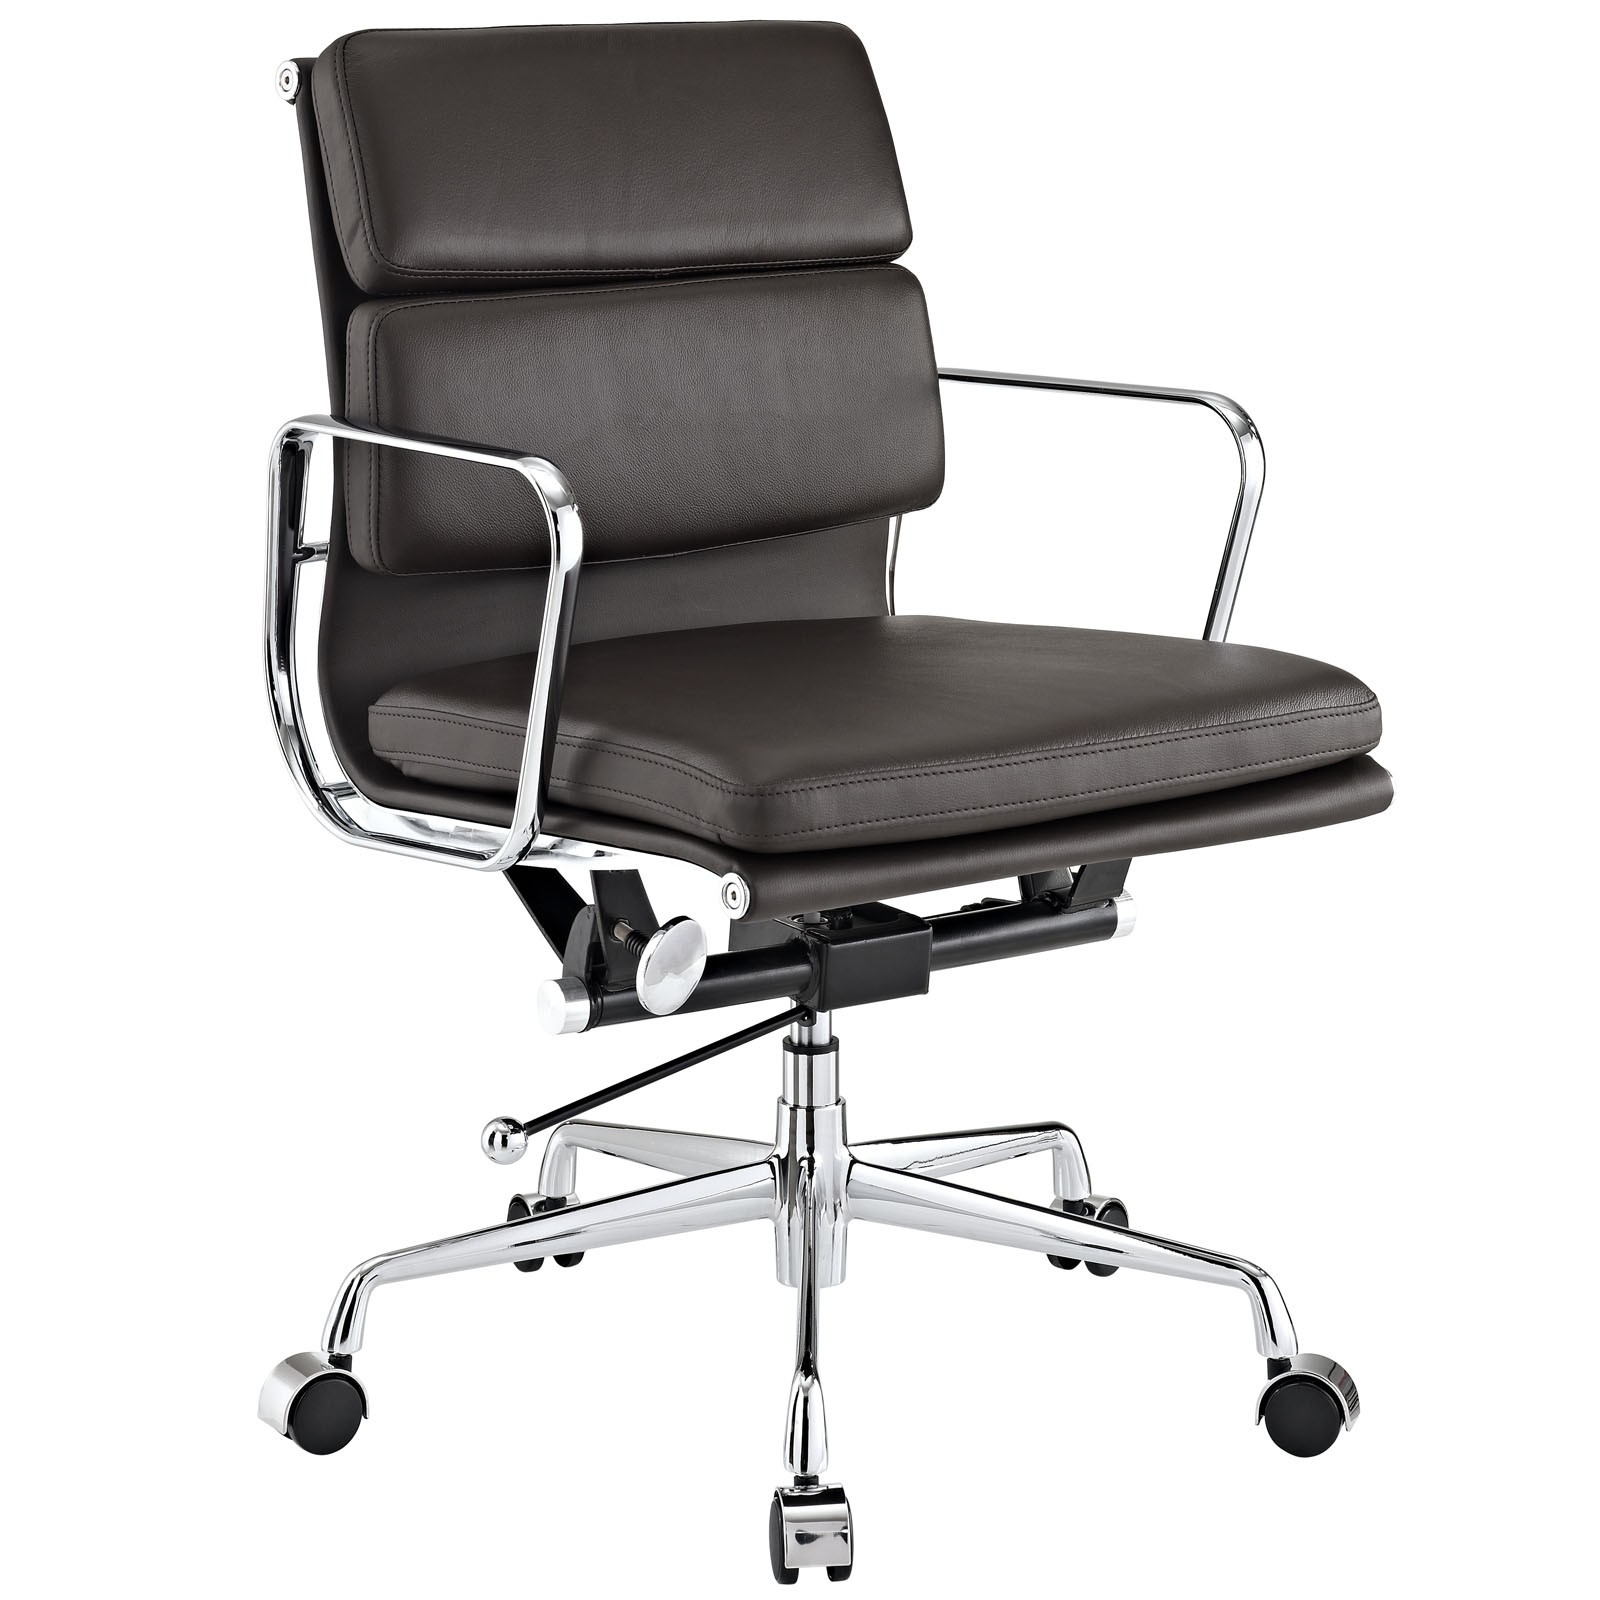 https://www.modterior.com/images/W/eames-mid-softpad-brown-officechair.jpg